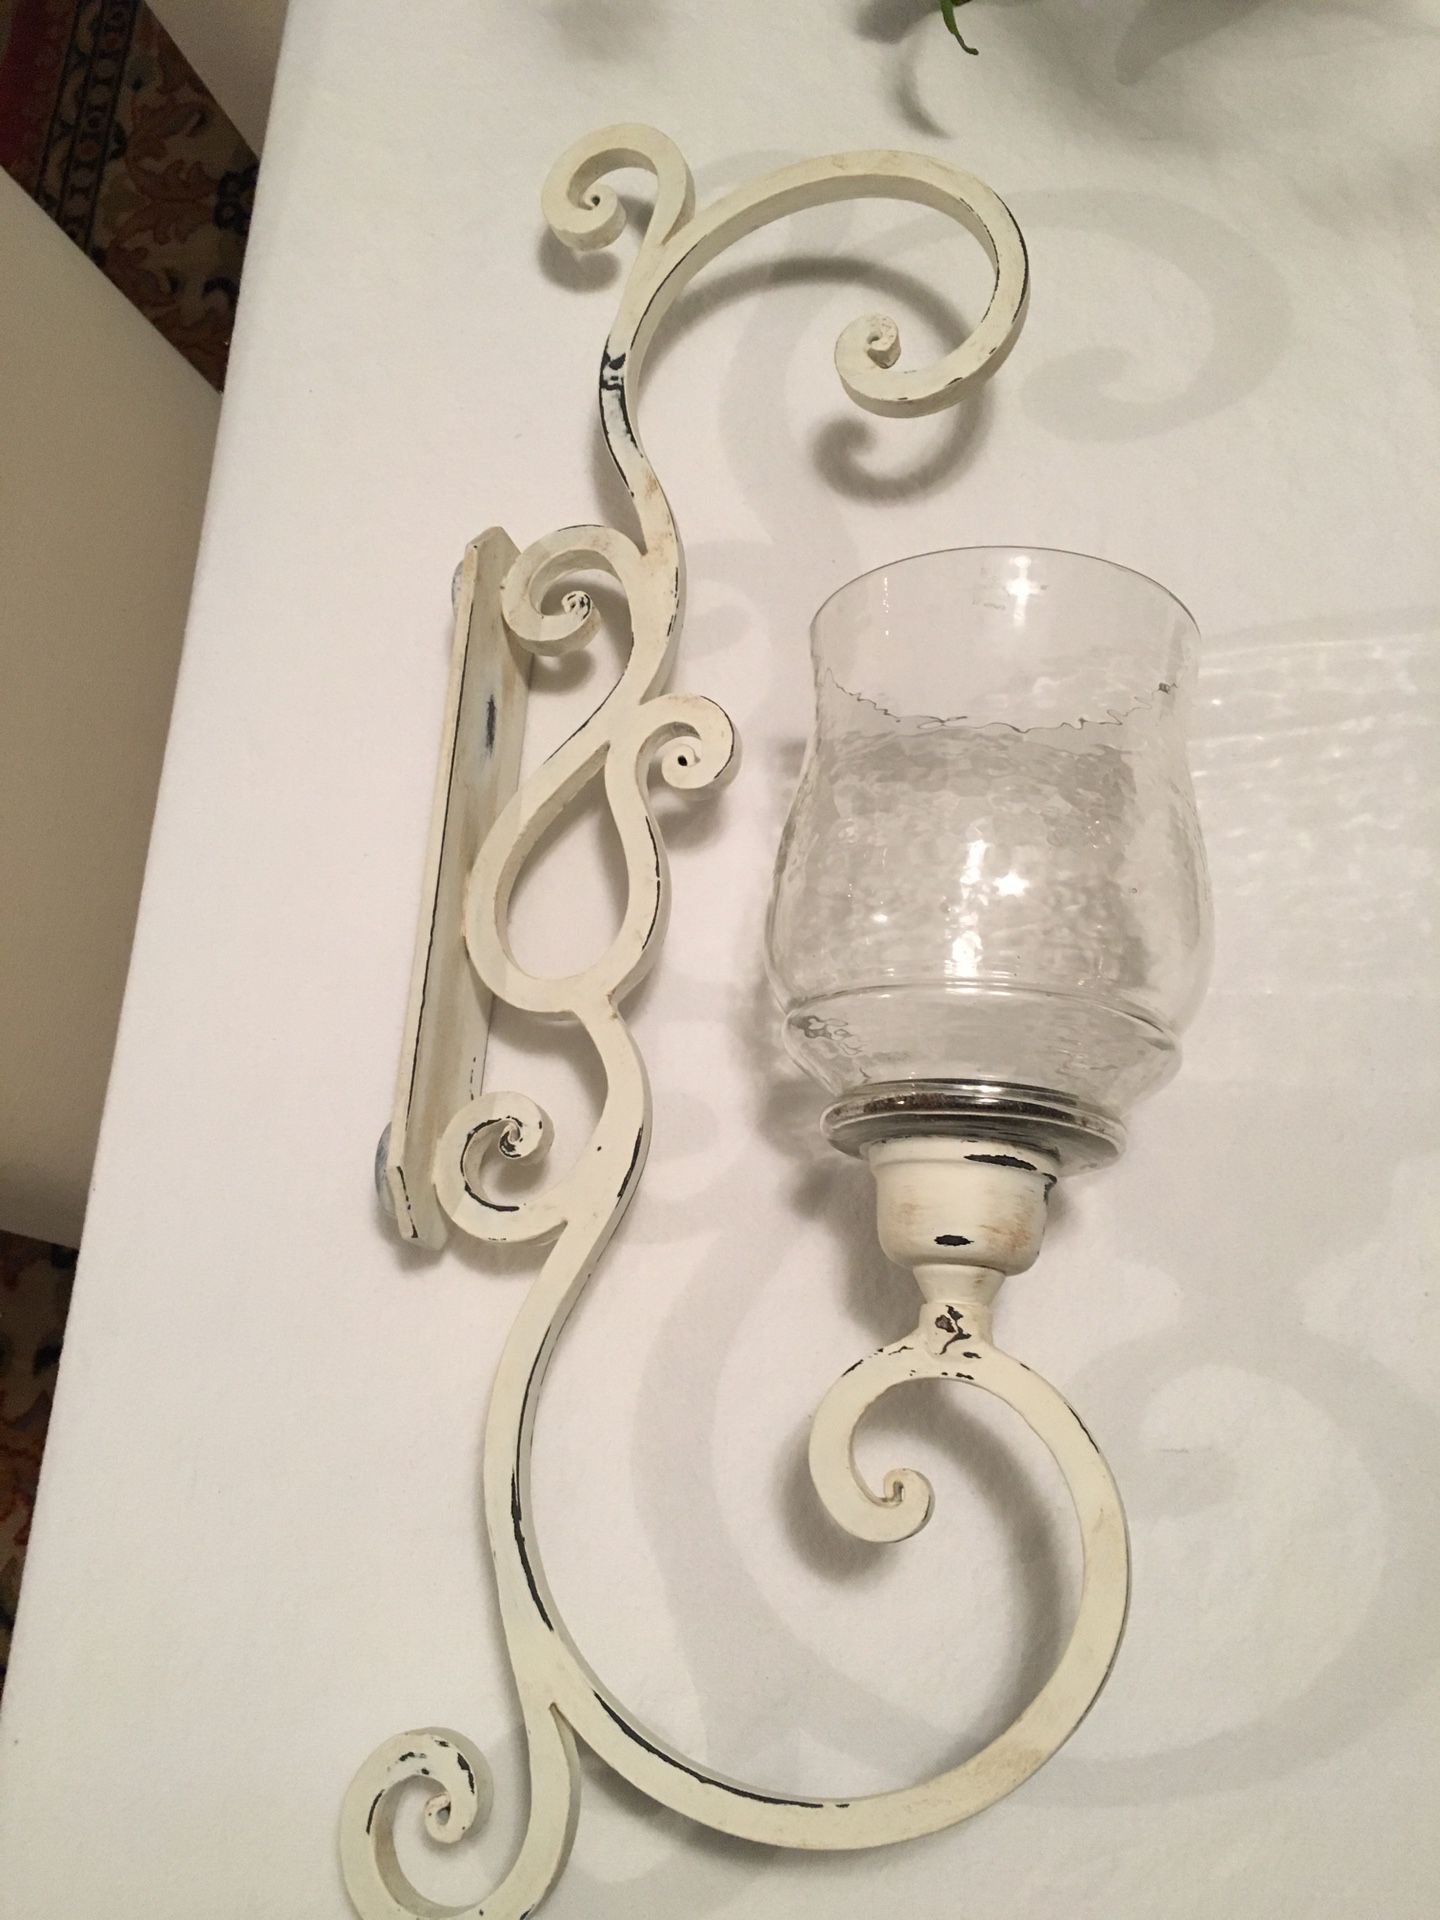 Wrought iron candle holders